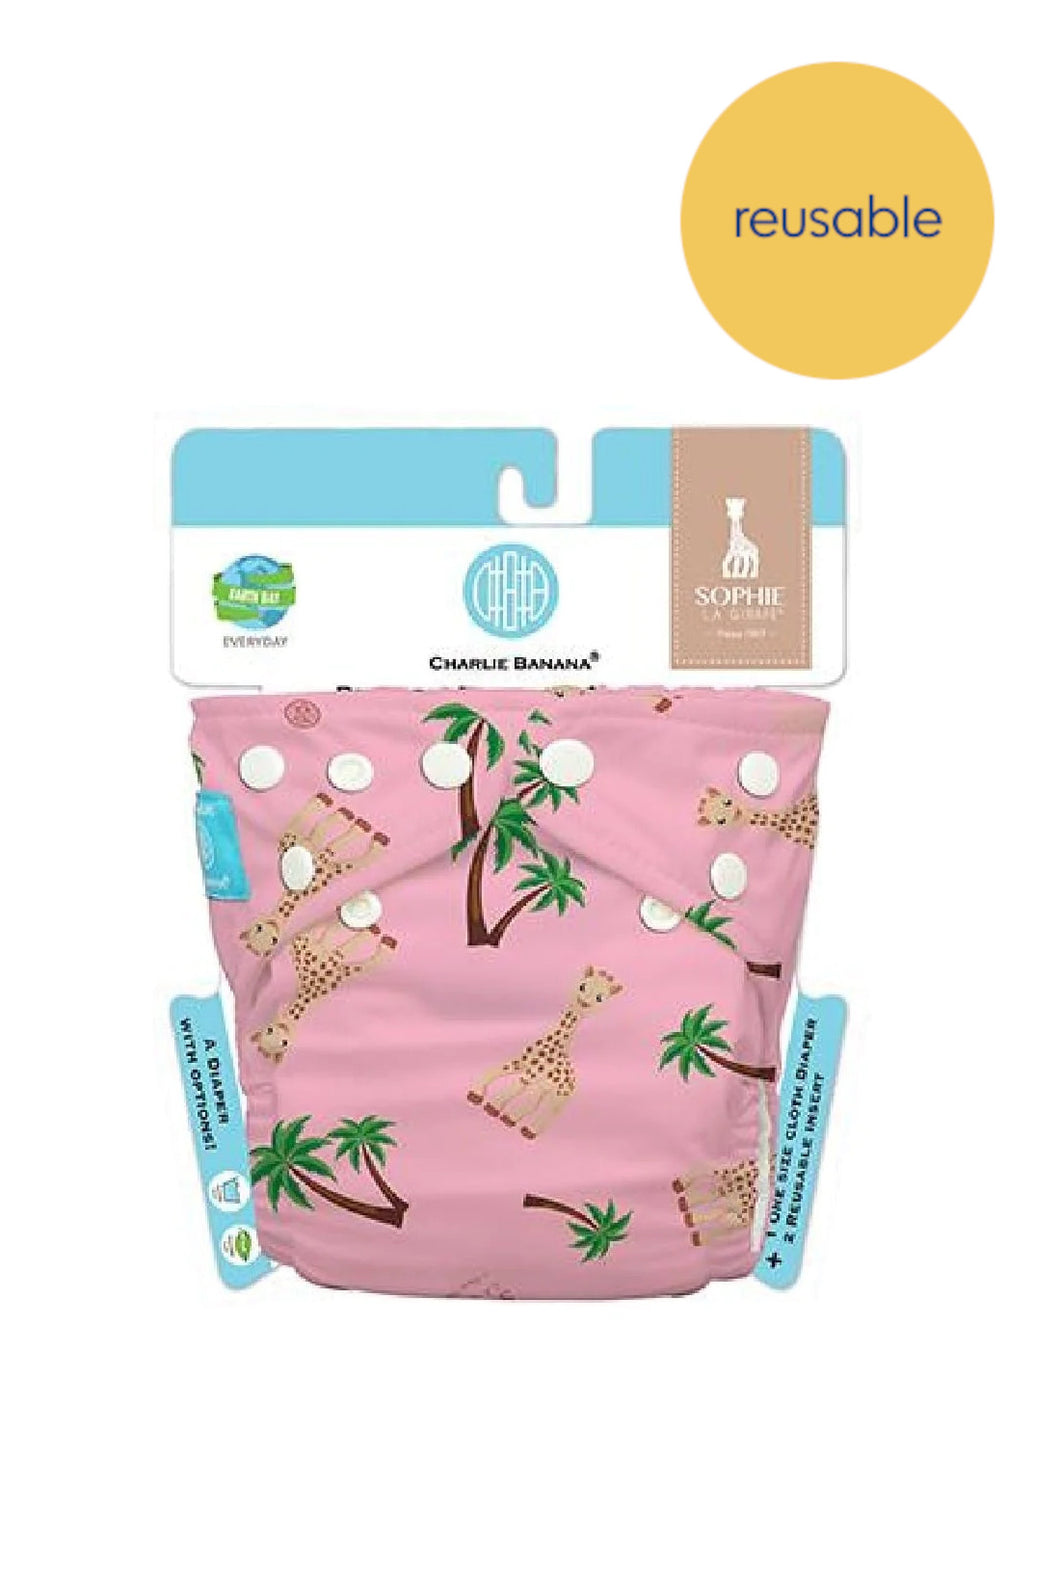 Charlie Banana Reusable Cloth Diaper: One-Size with Fleece - Sophie Coco Pink